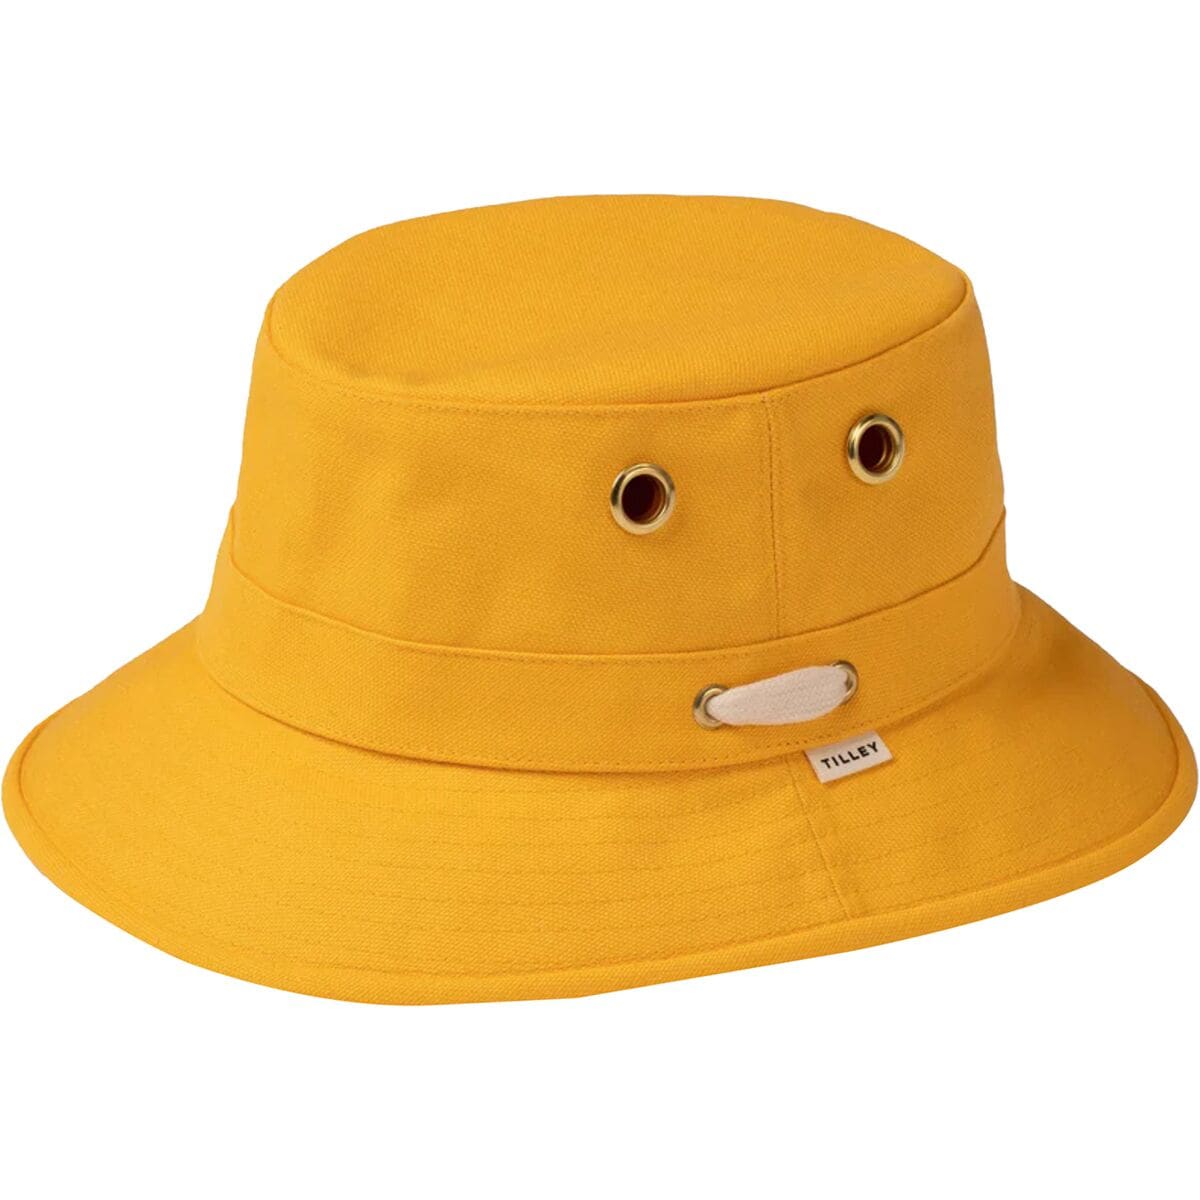 Tilley The Iconic T1 Bucket Hat Yellow, 7 1/2